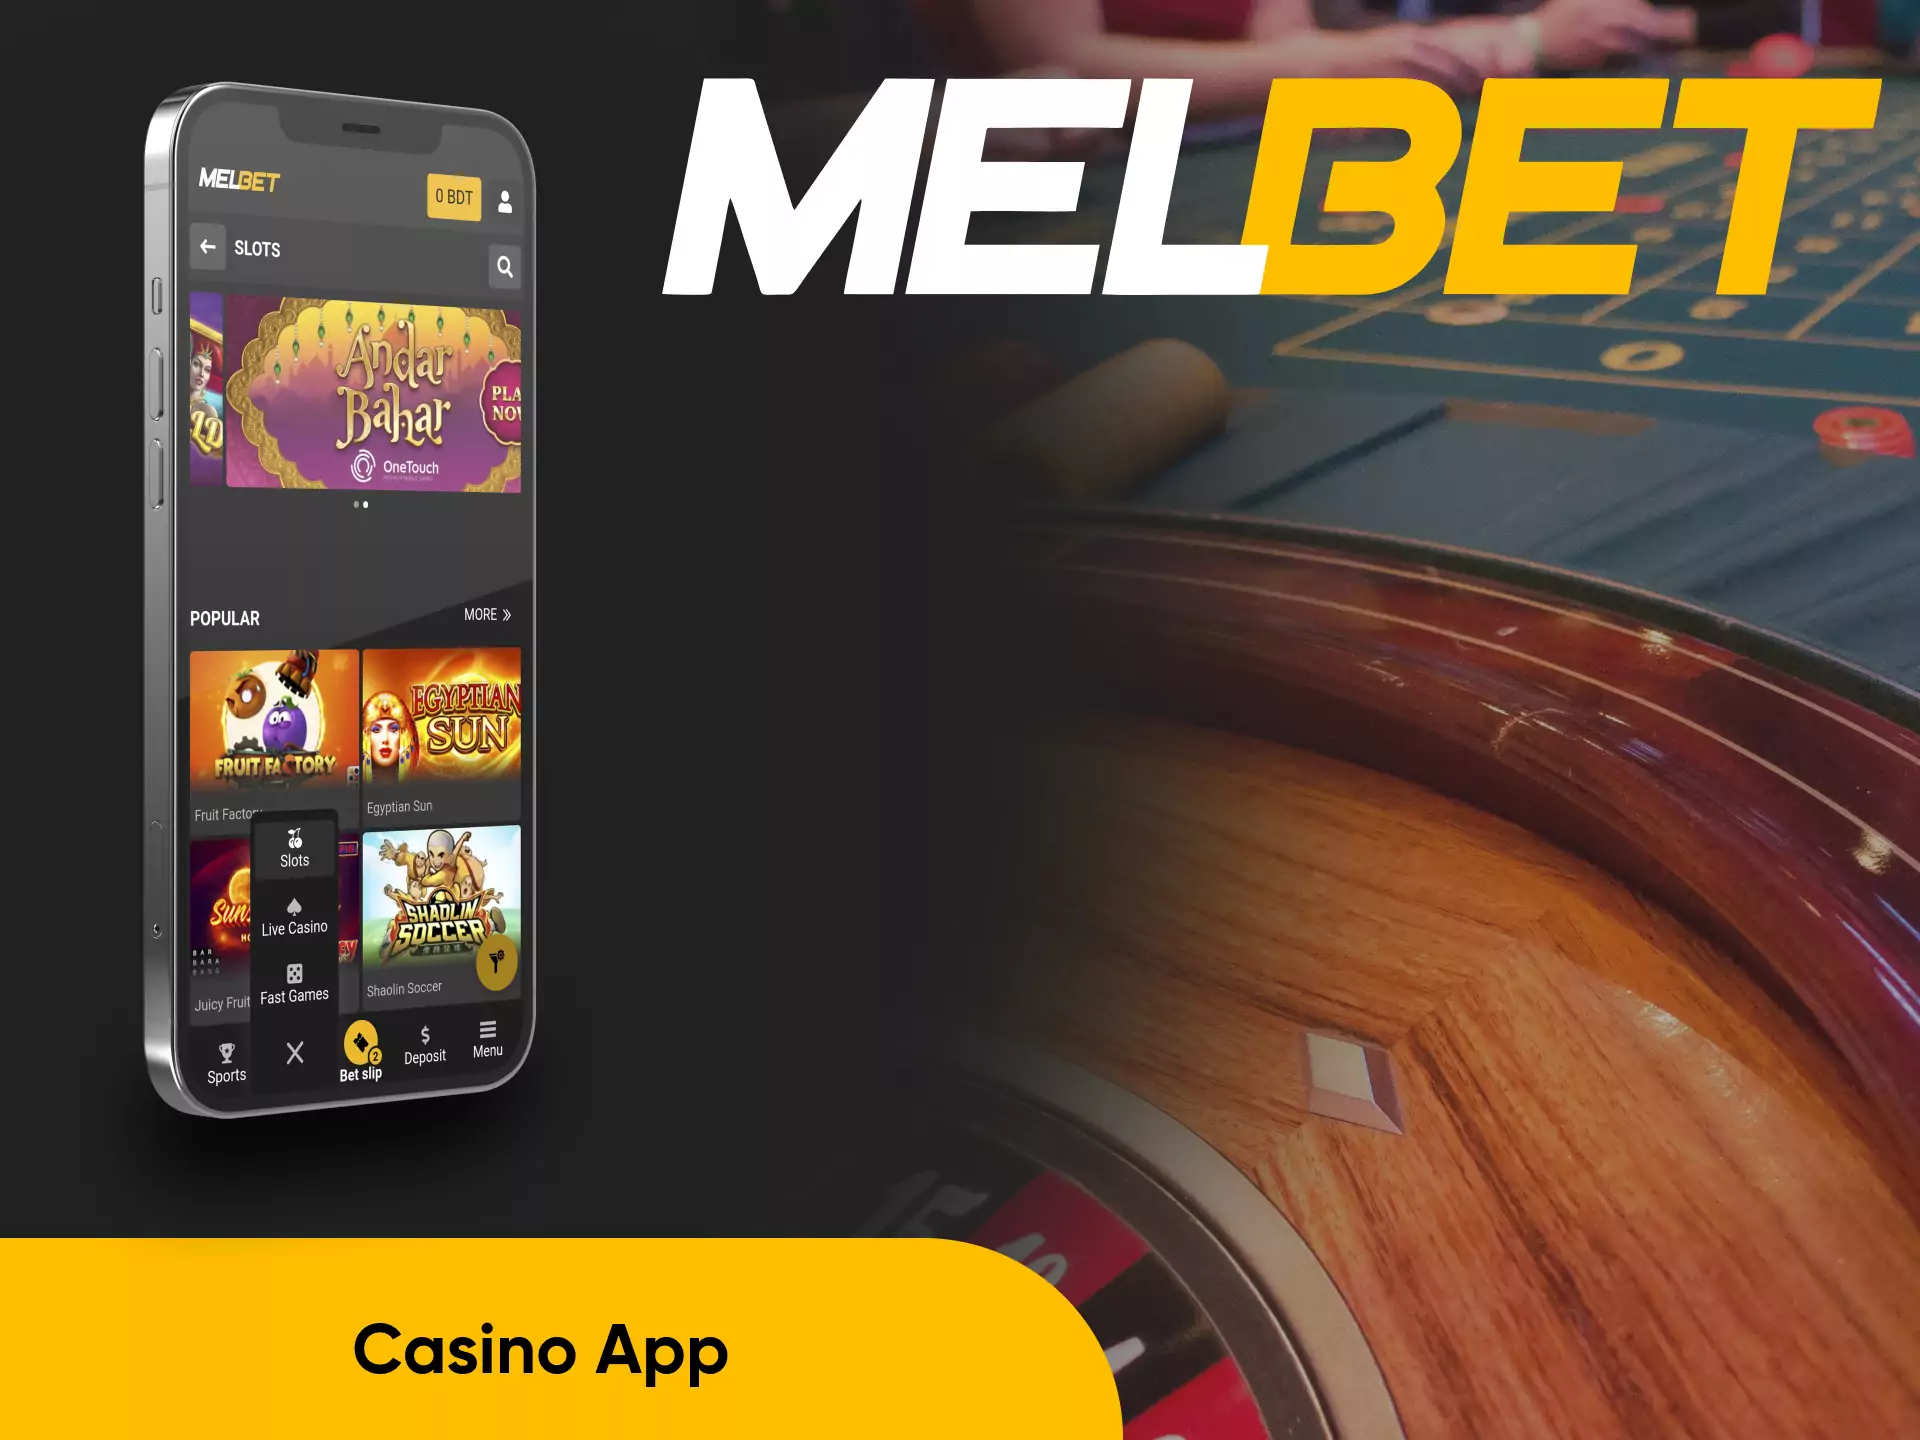 Besides betting, you can play distinguishable casino games available in the Melbet app.